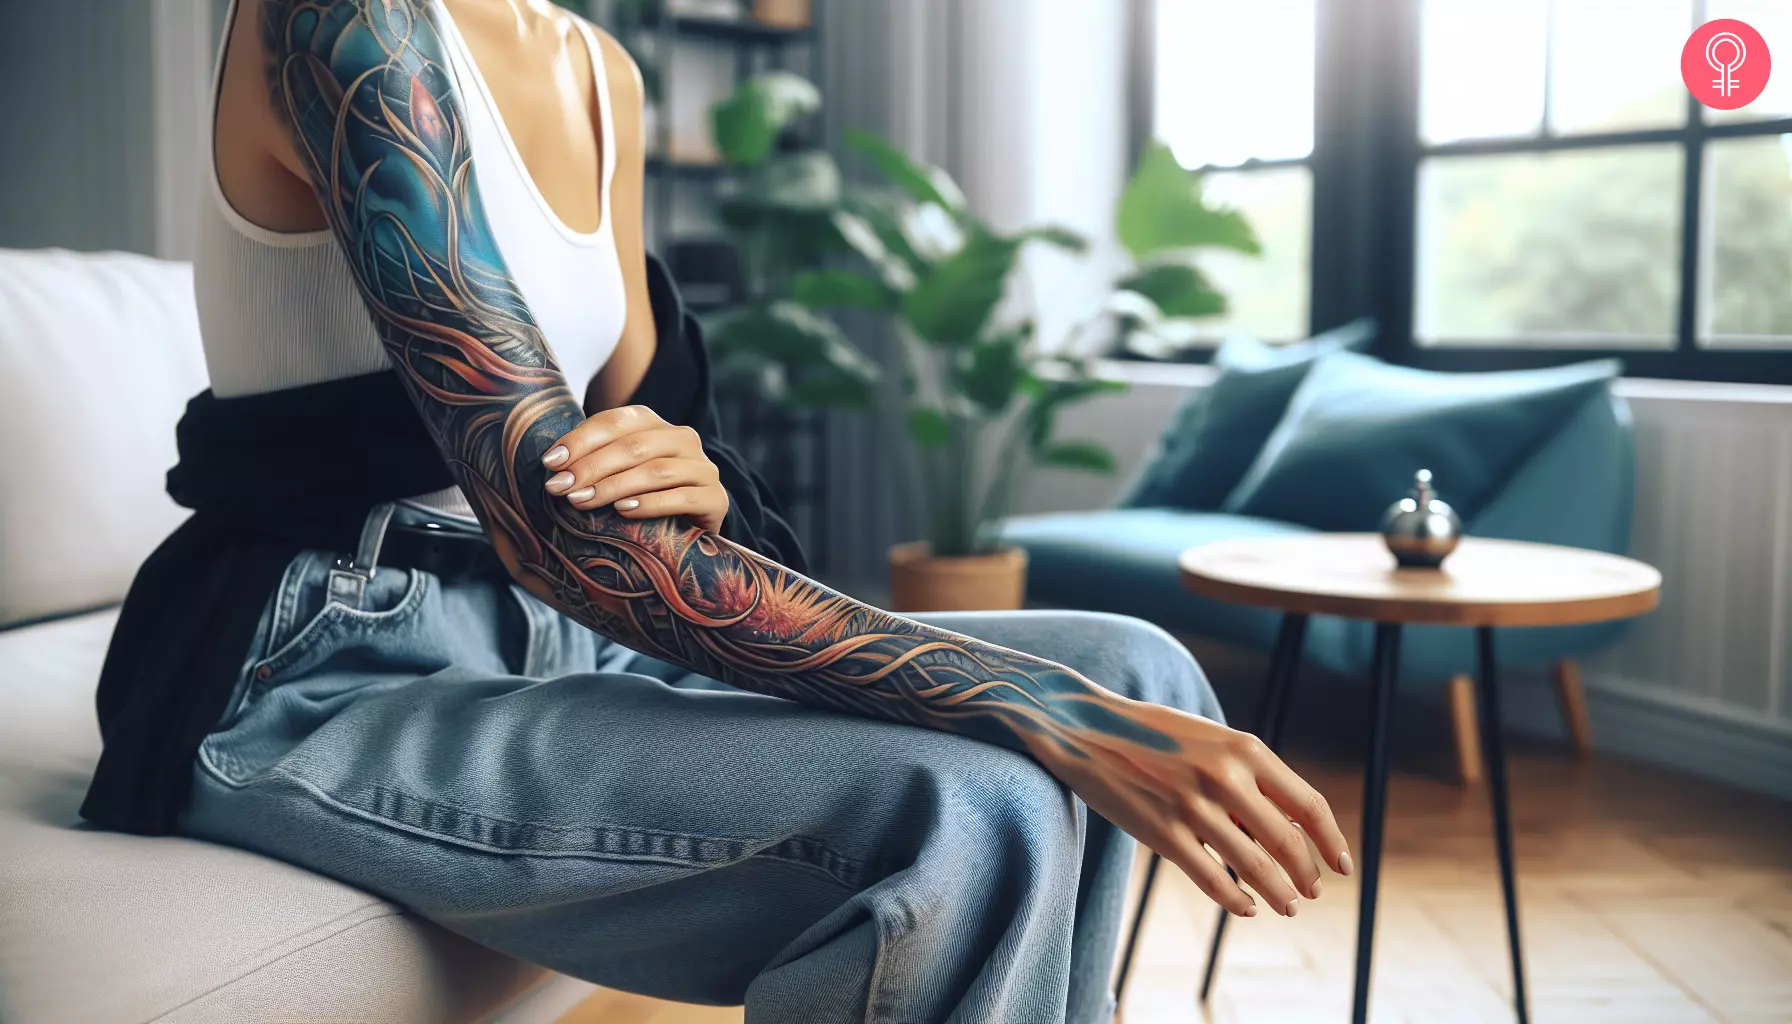 Abstract Arm Tattoo